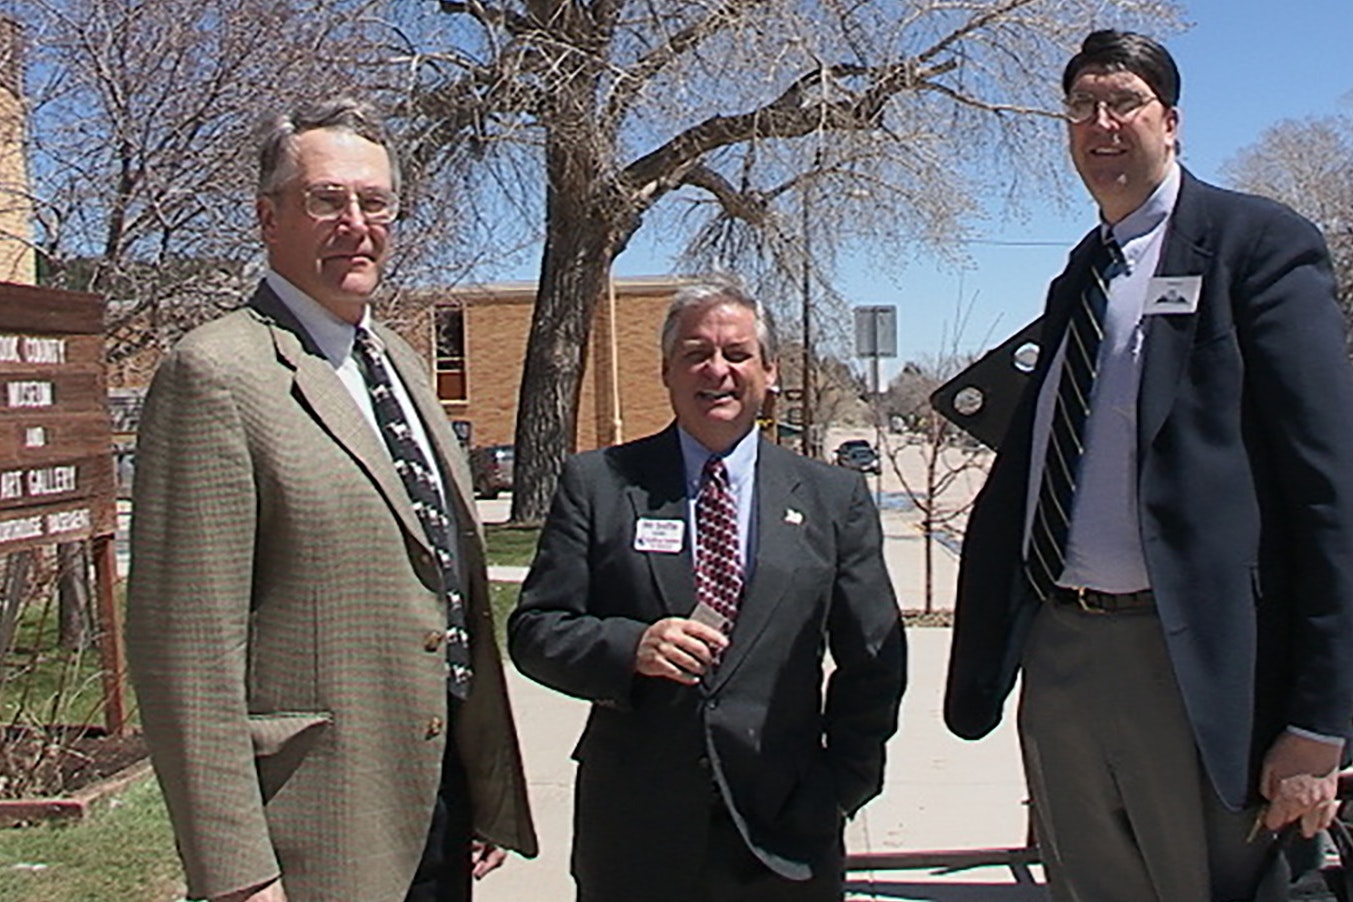 Bill Sniffin, center, with 7-foot-3 Paul Krause, right, and Nels Smith Jr., who stood 6-foot-7, in a 2002 photo.